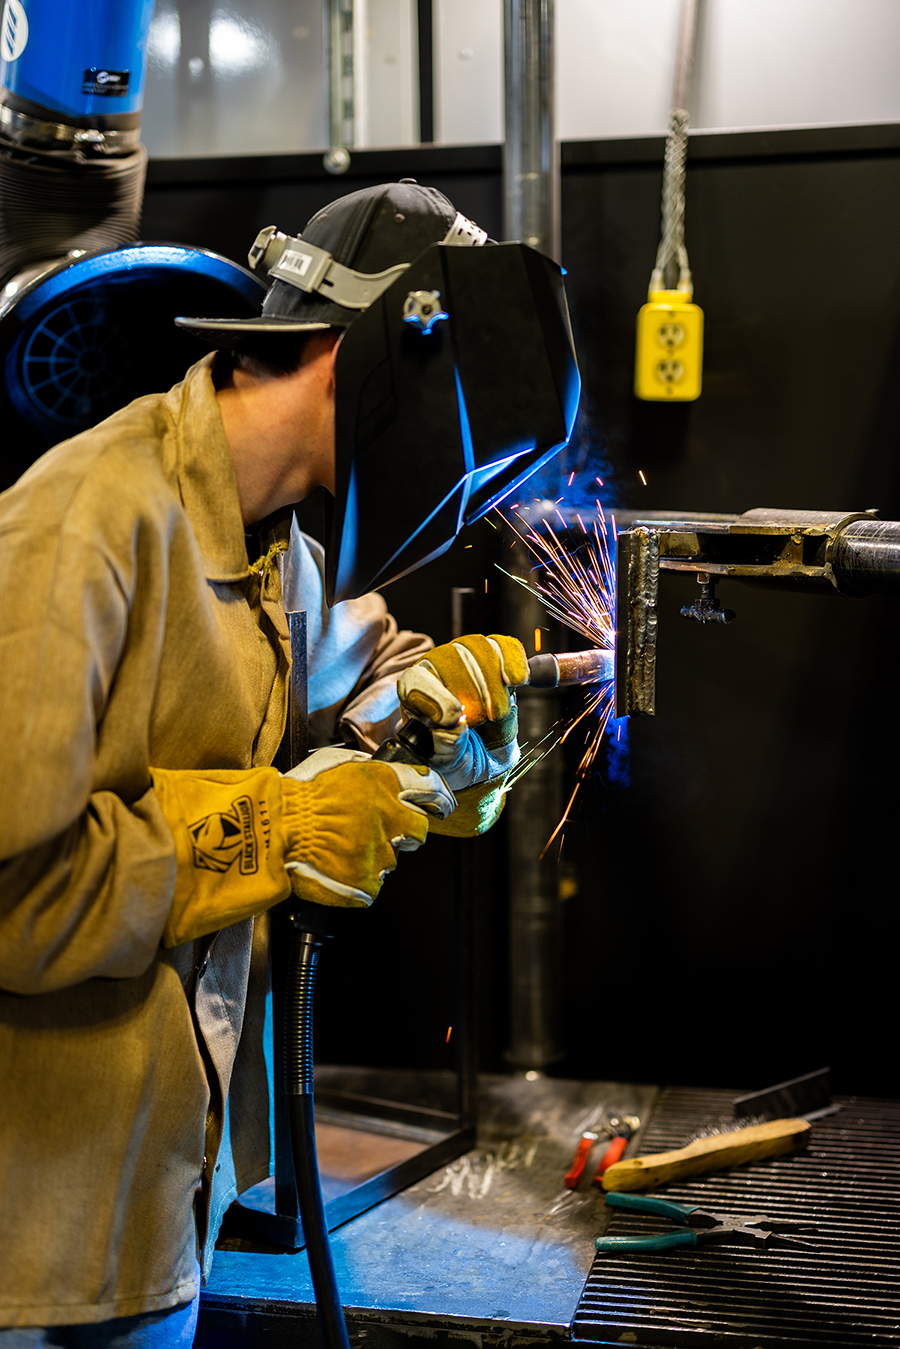 Man welding with sparks flying, wearing yellow safety coat, yellow gloves and a welding helmet.